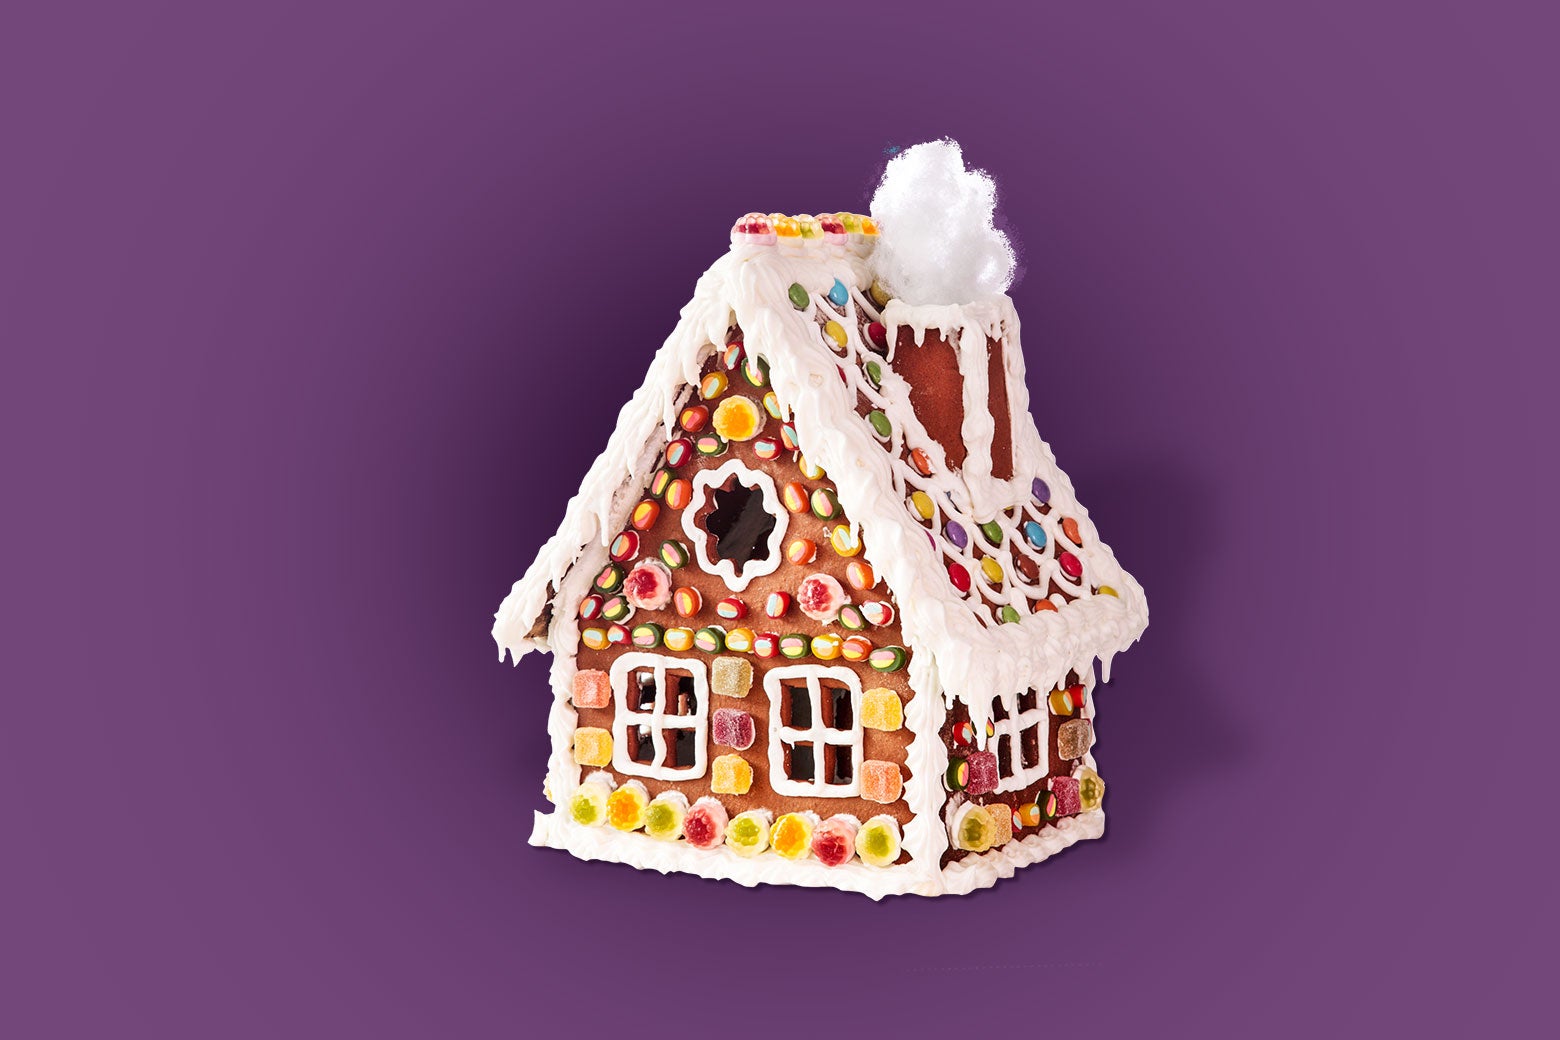 A candy house